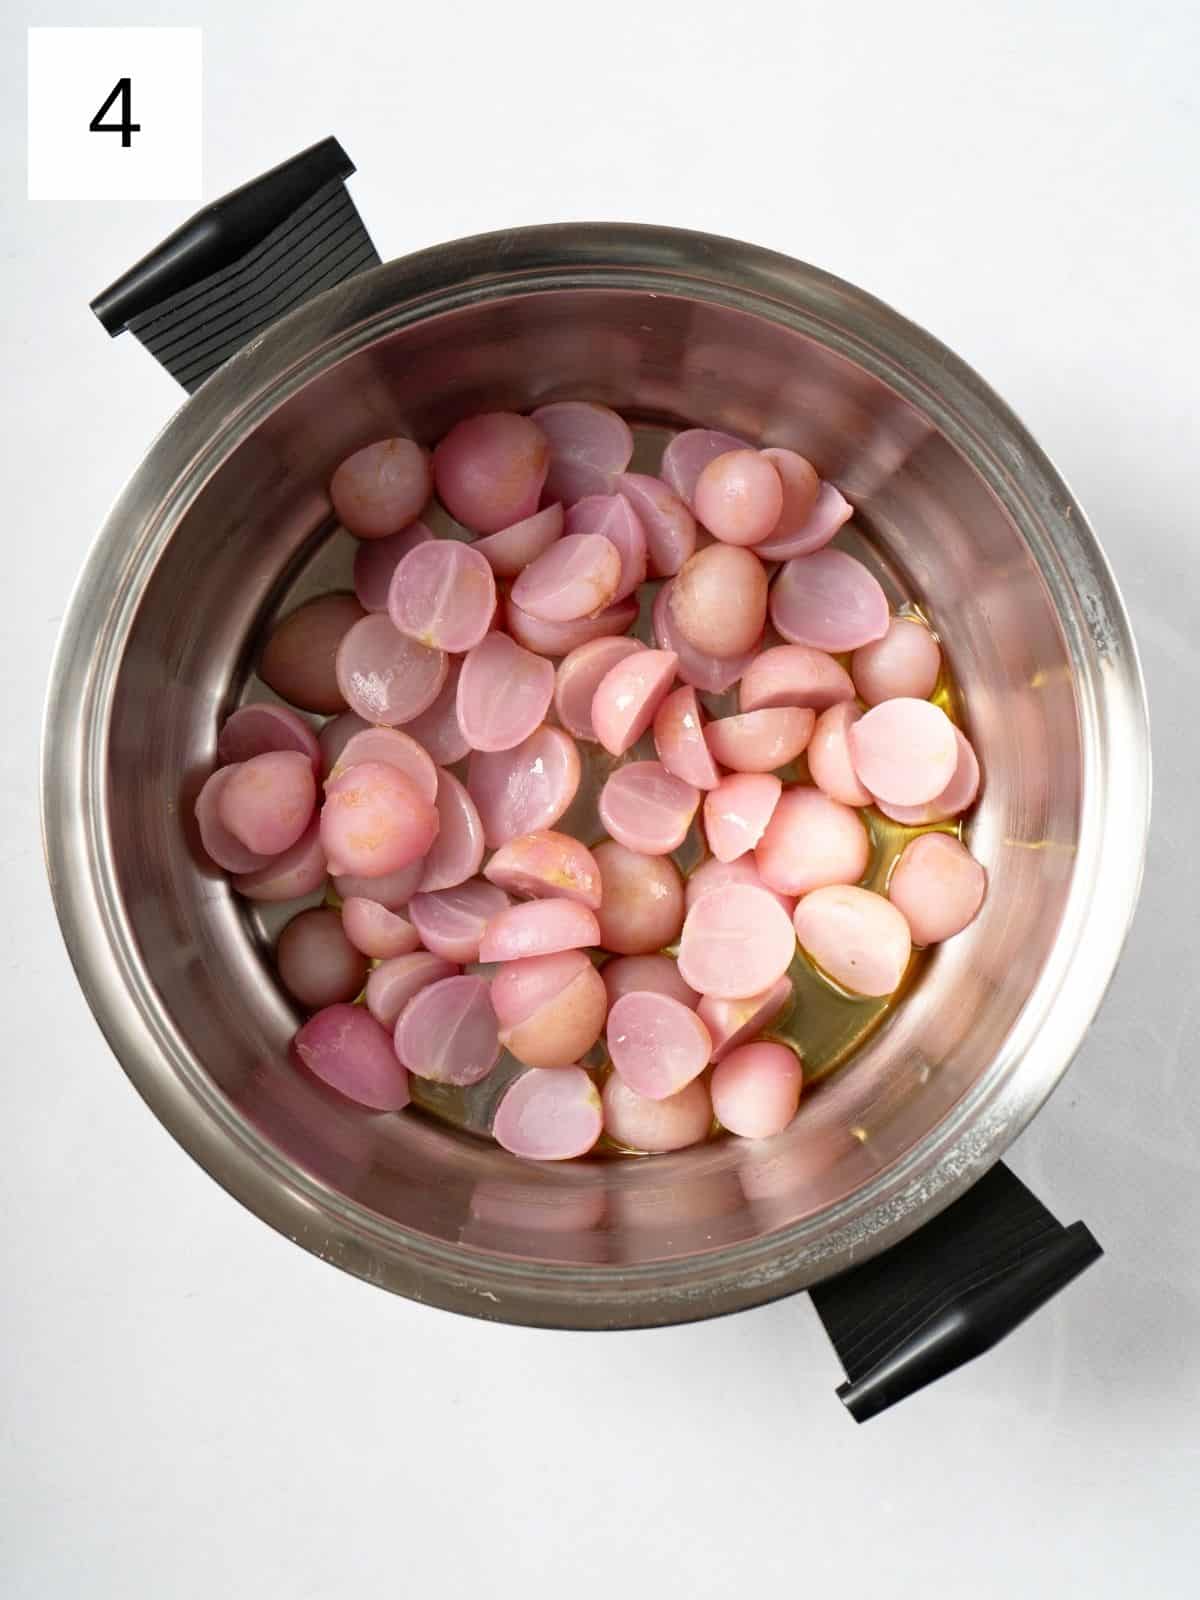 softened radish halves with oil in a pot.